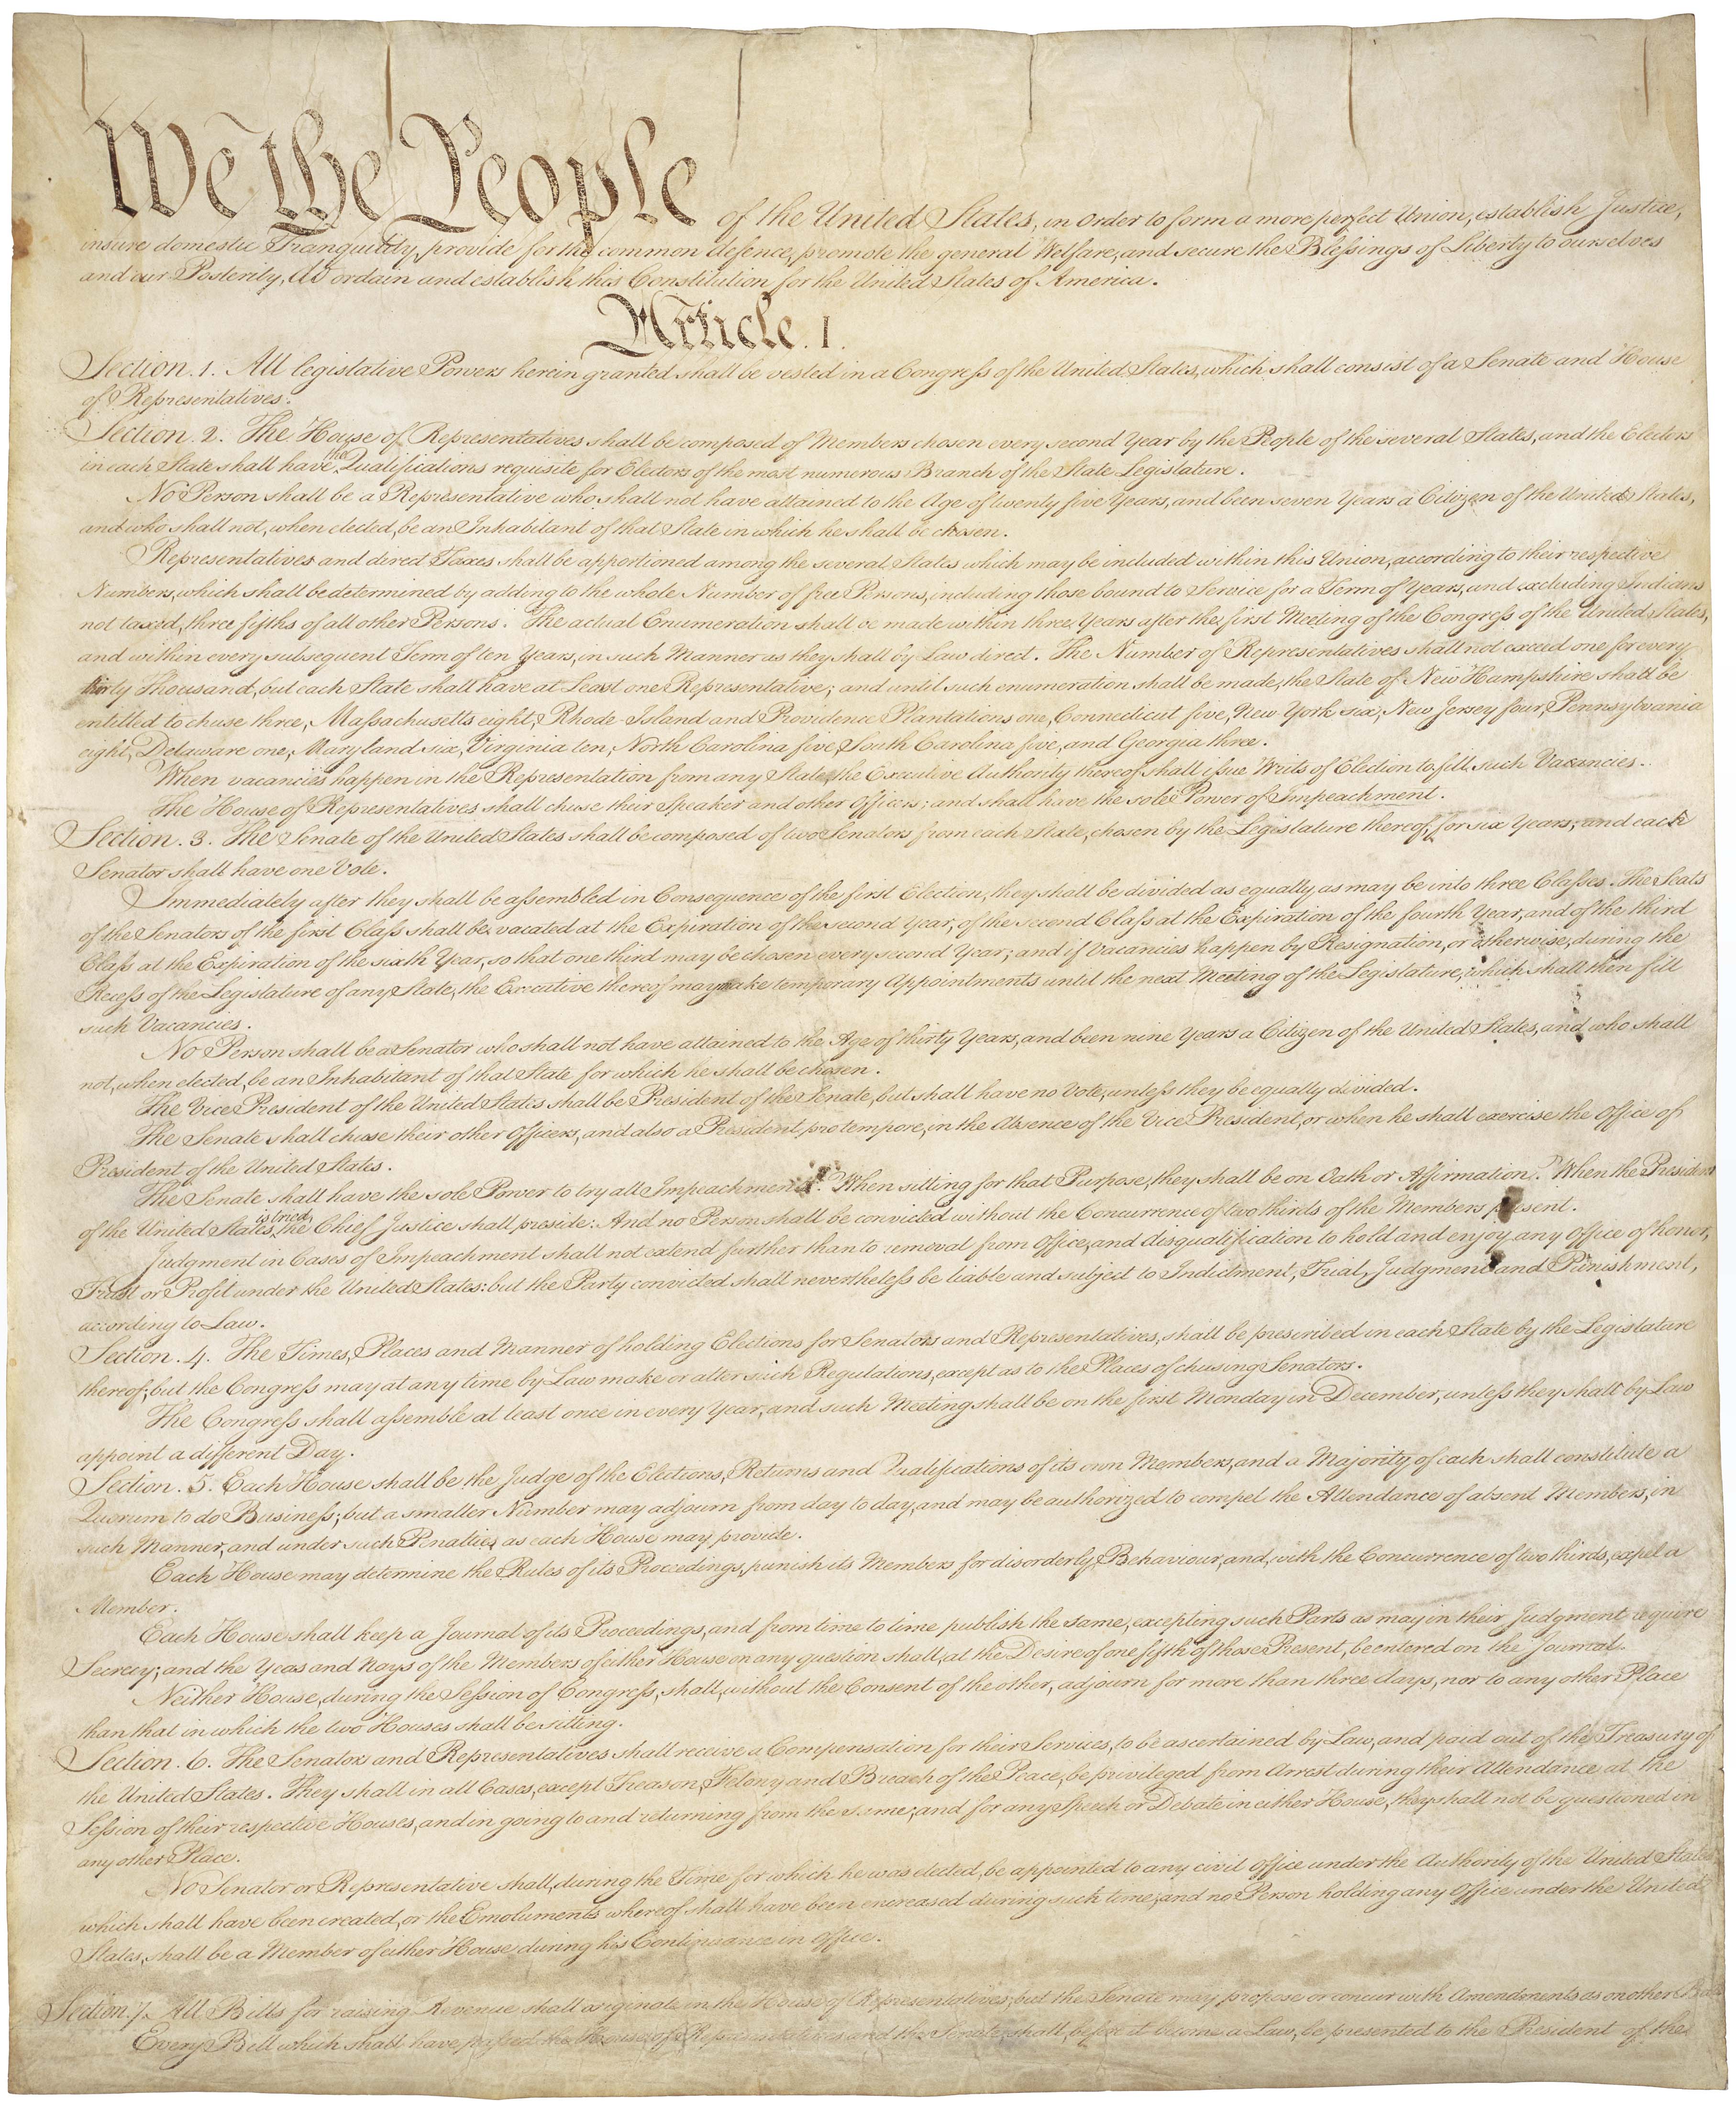 Pocket Constitution: The Declaration of Independence, Constitution